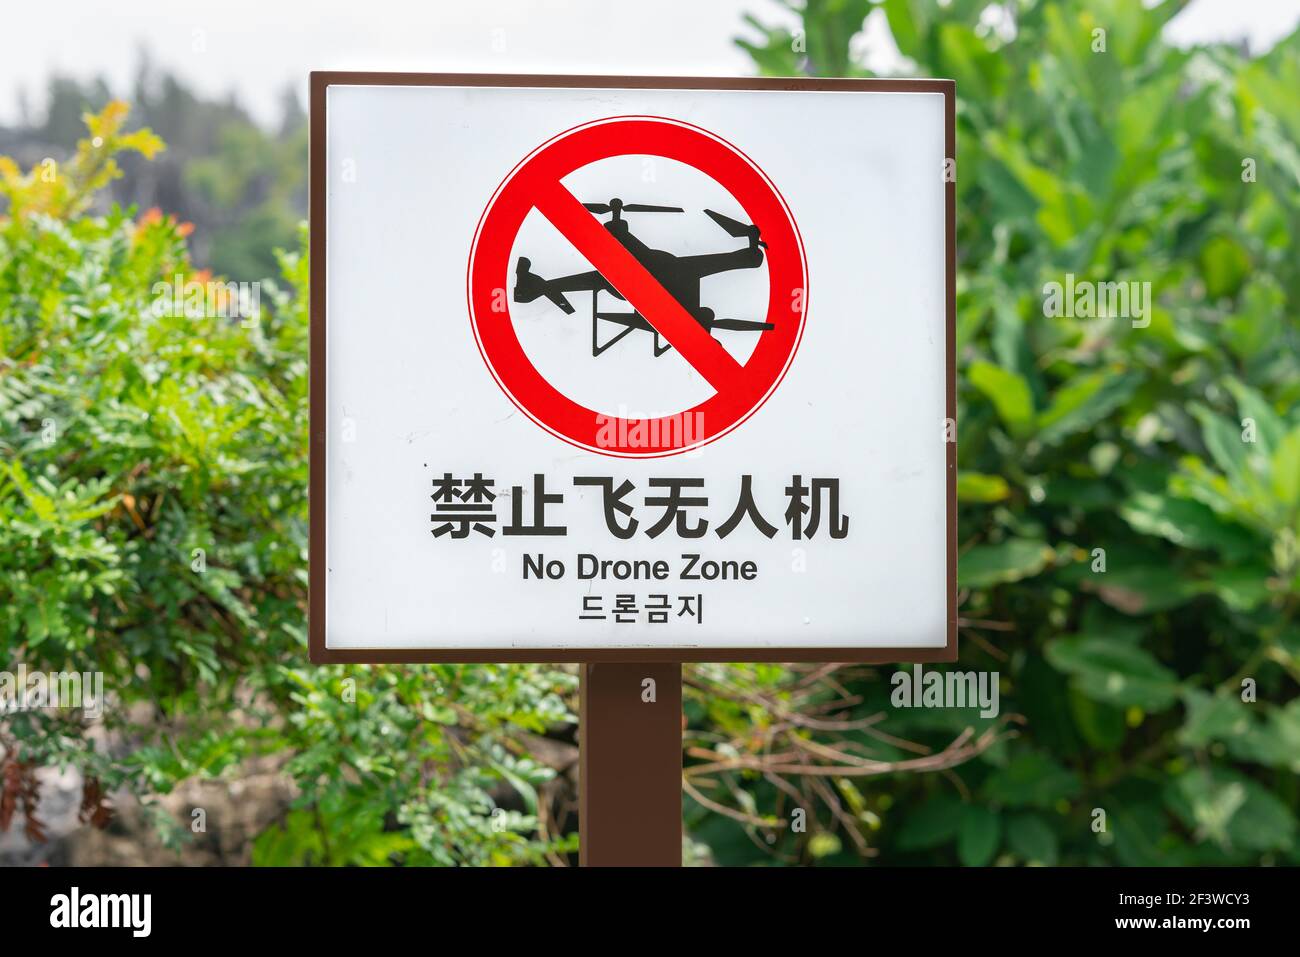 No drone zone board written in Chinese English and Korean language with logo to ban drone flying in the area ( translation : no drone zone ) Stock Photo